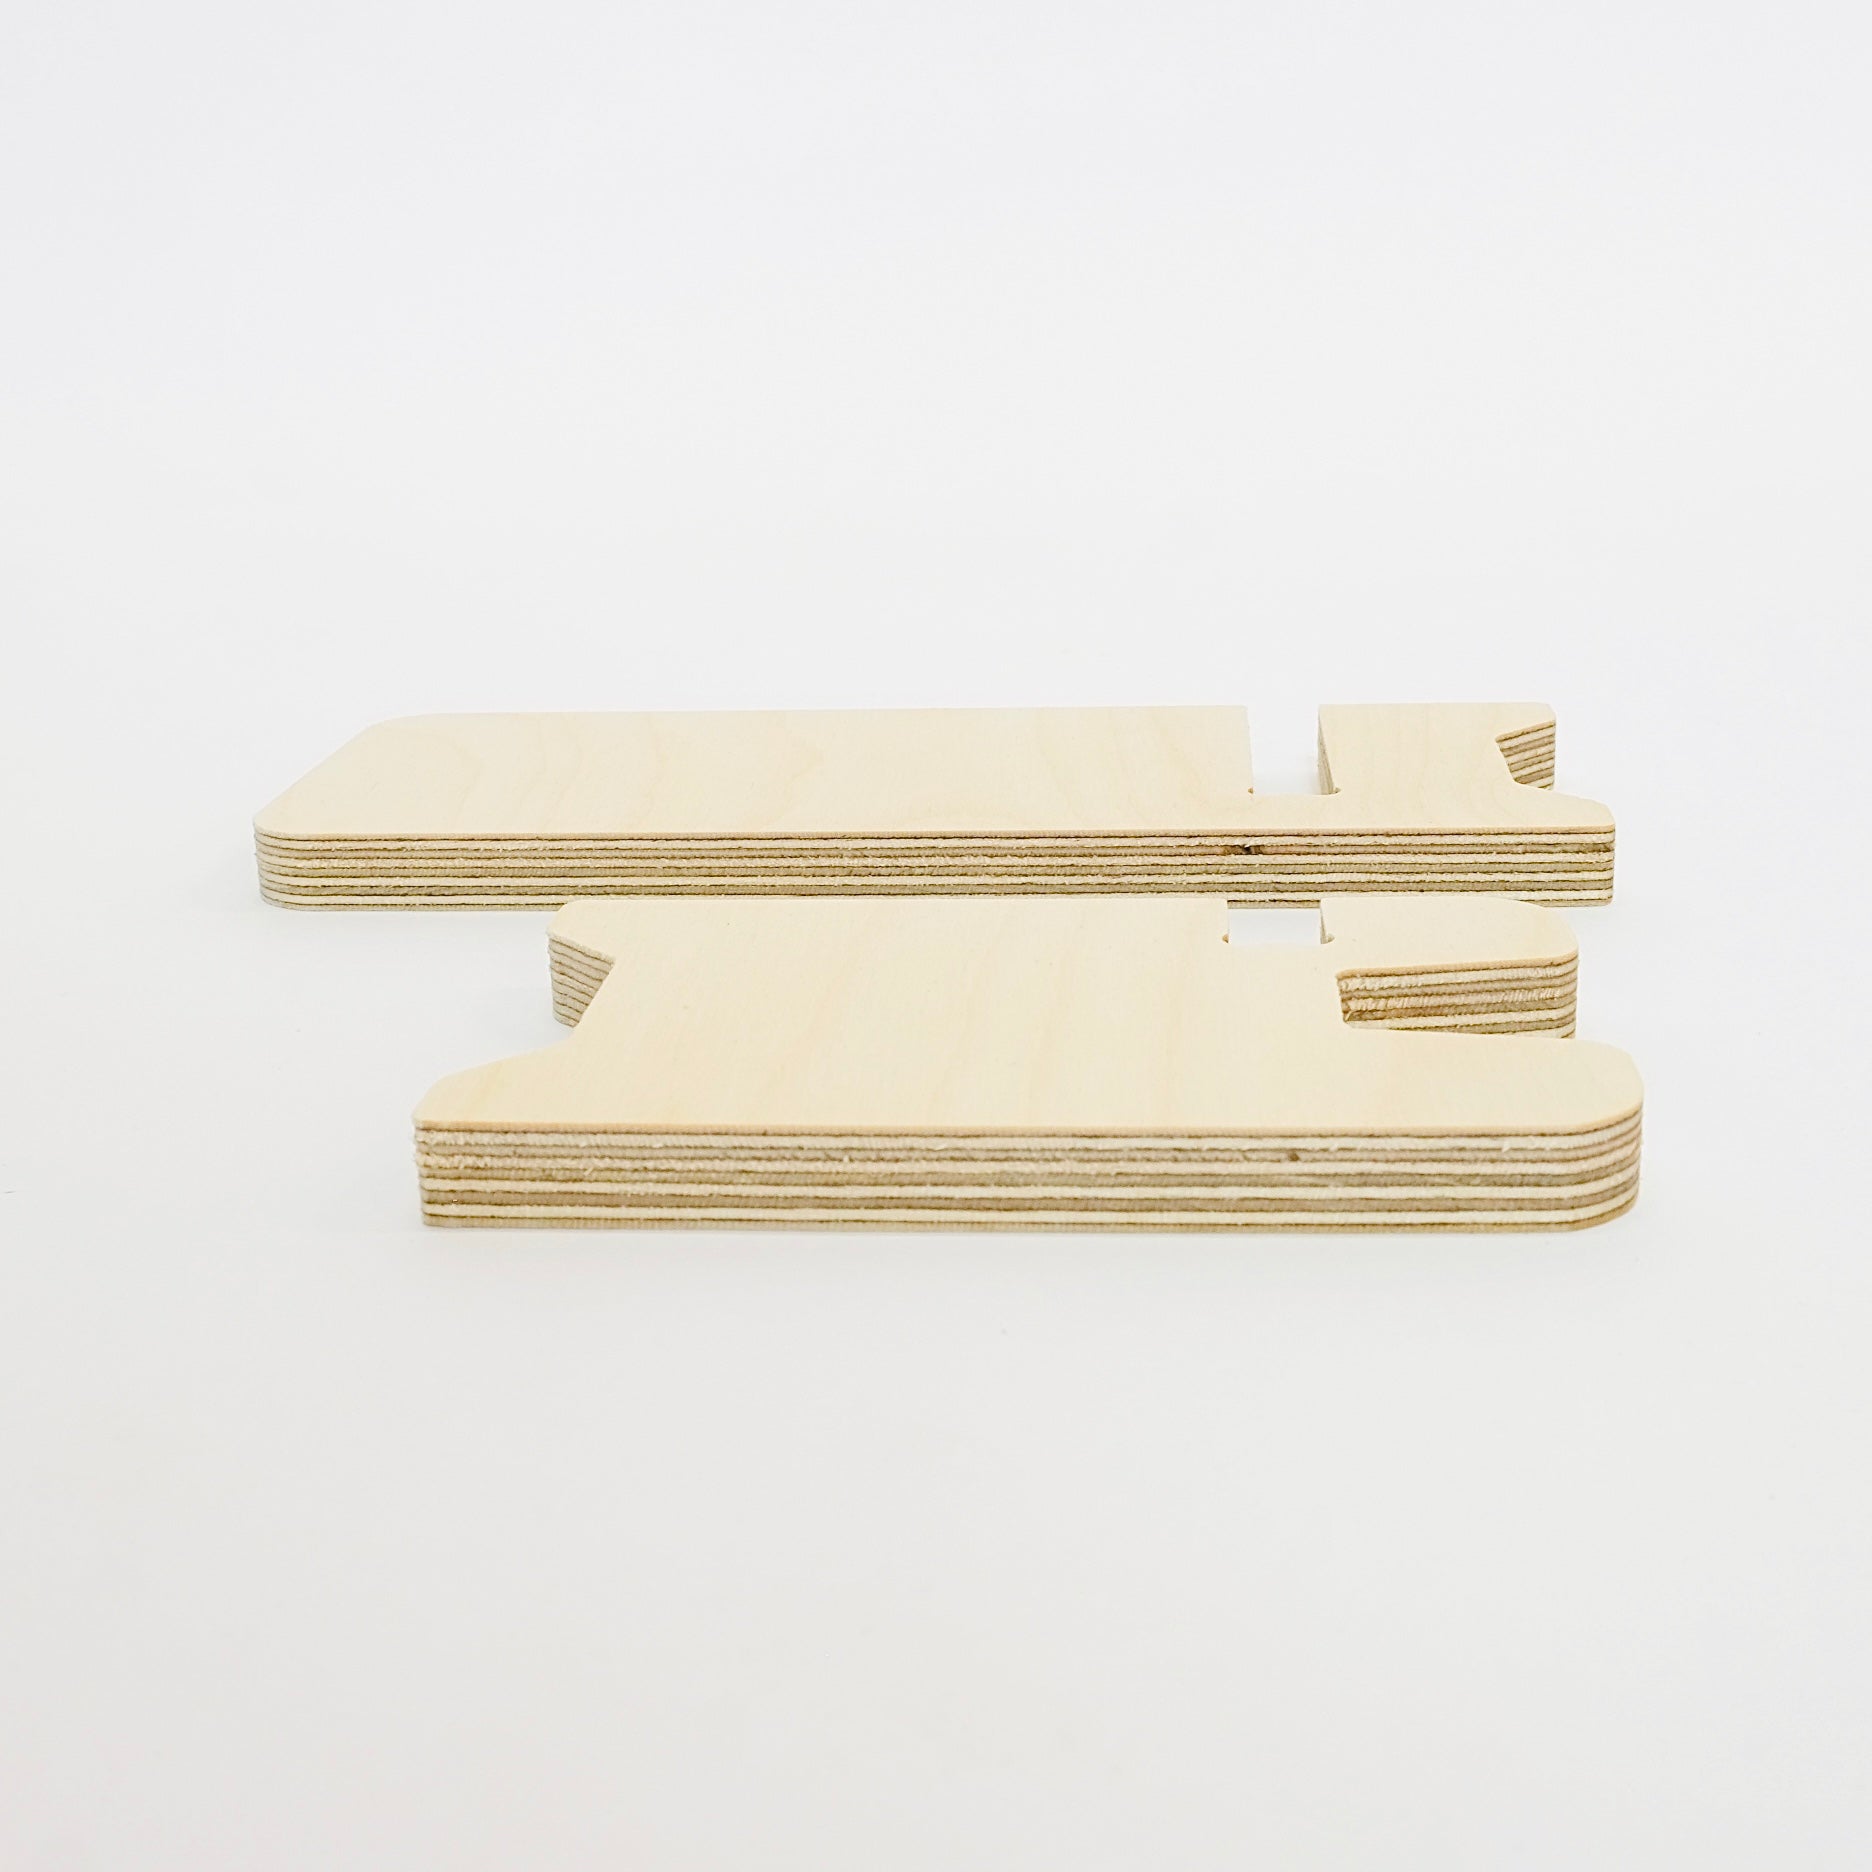 plan view of two pieces of a pale wood birch plywood phone stand lying side by side.